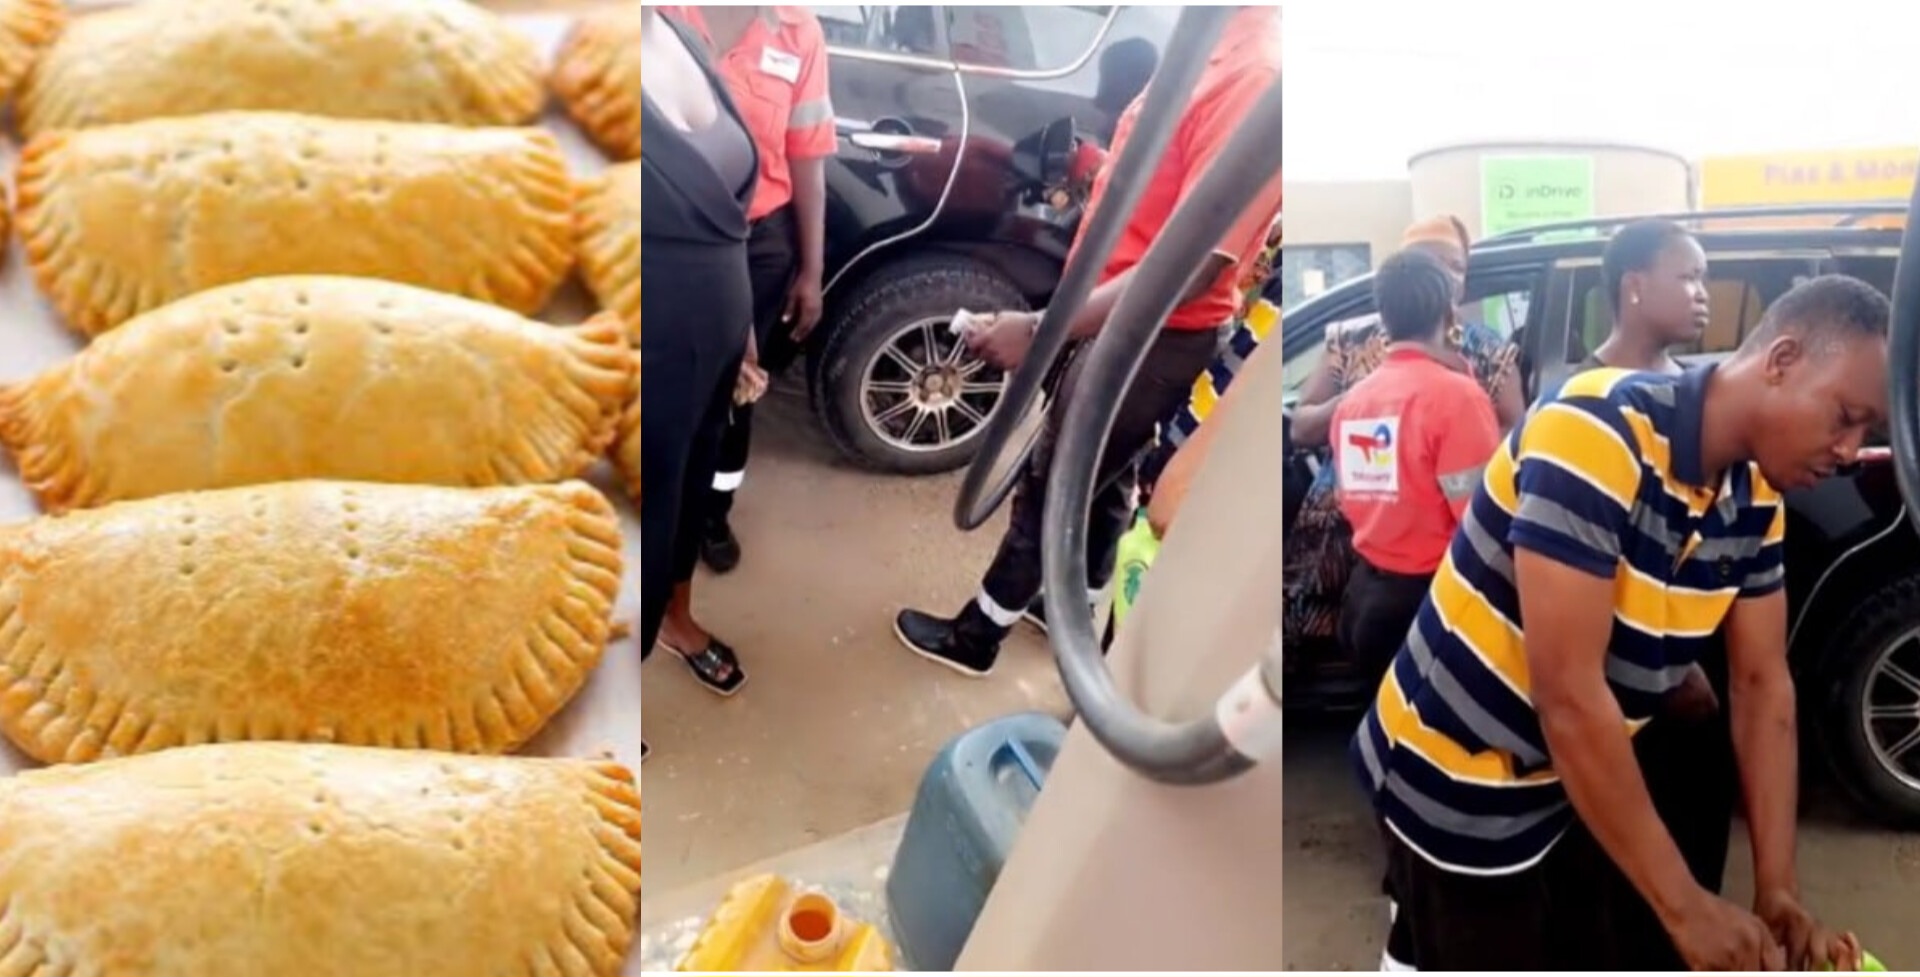 A Man blows hot as filling station says customers must buy meat pie before getting fuel (Video)